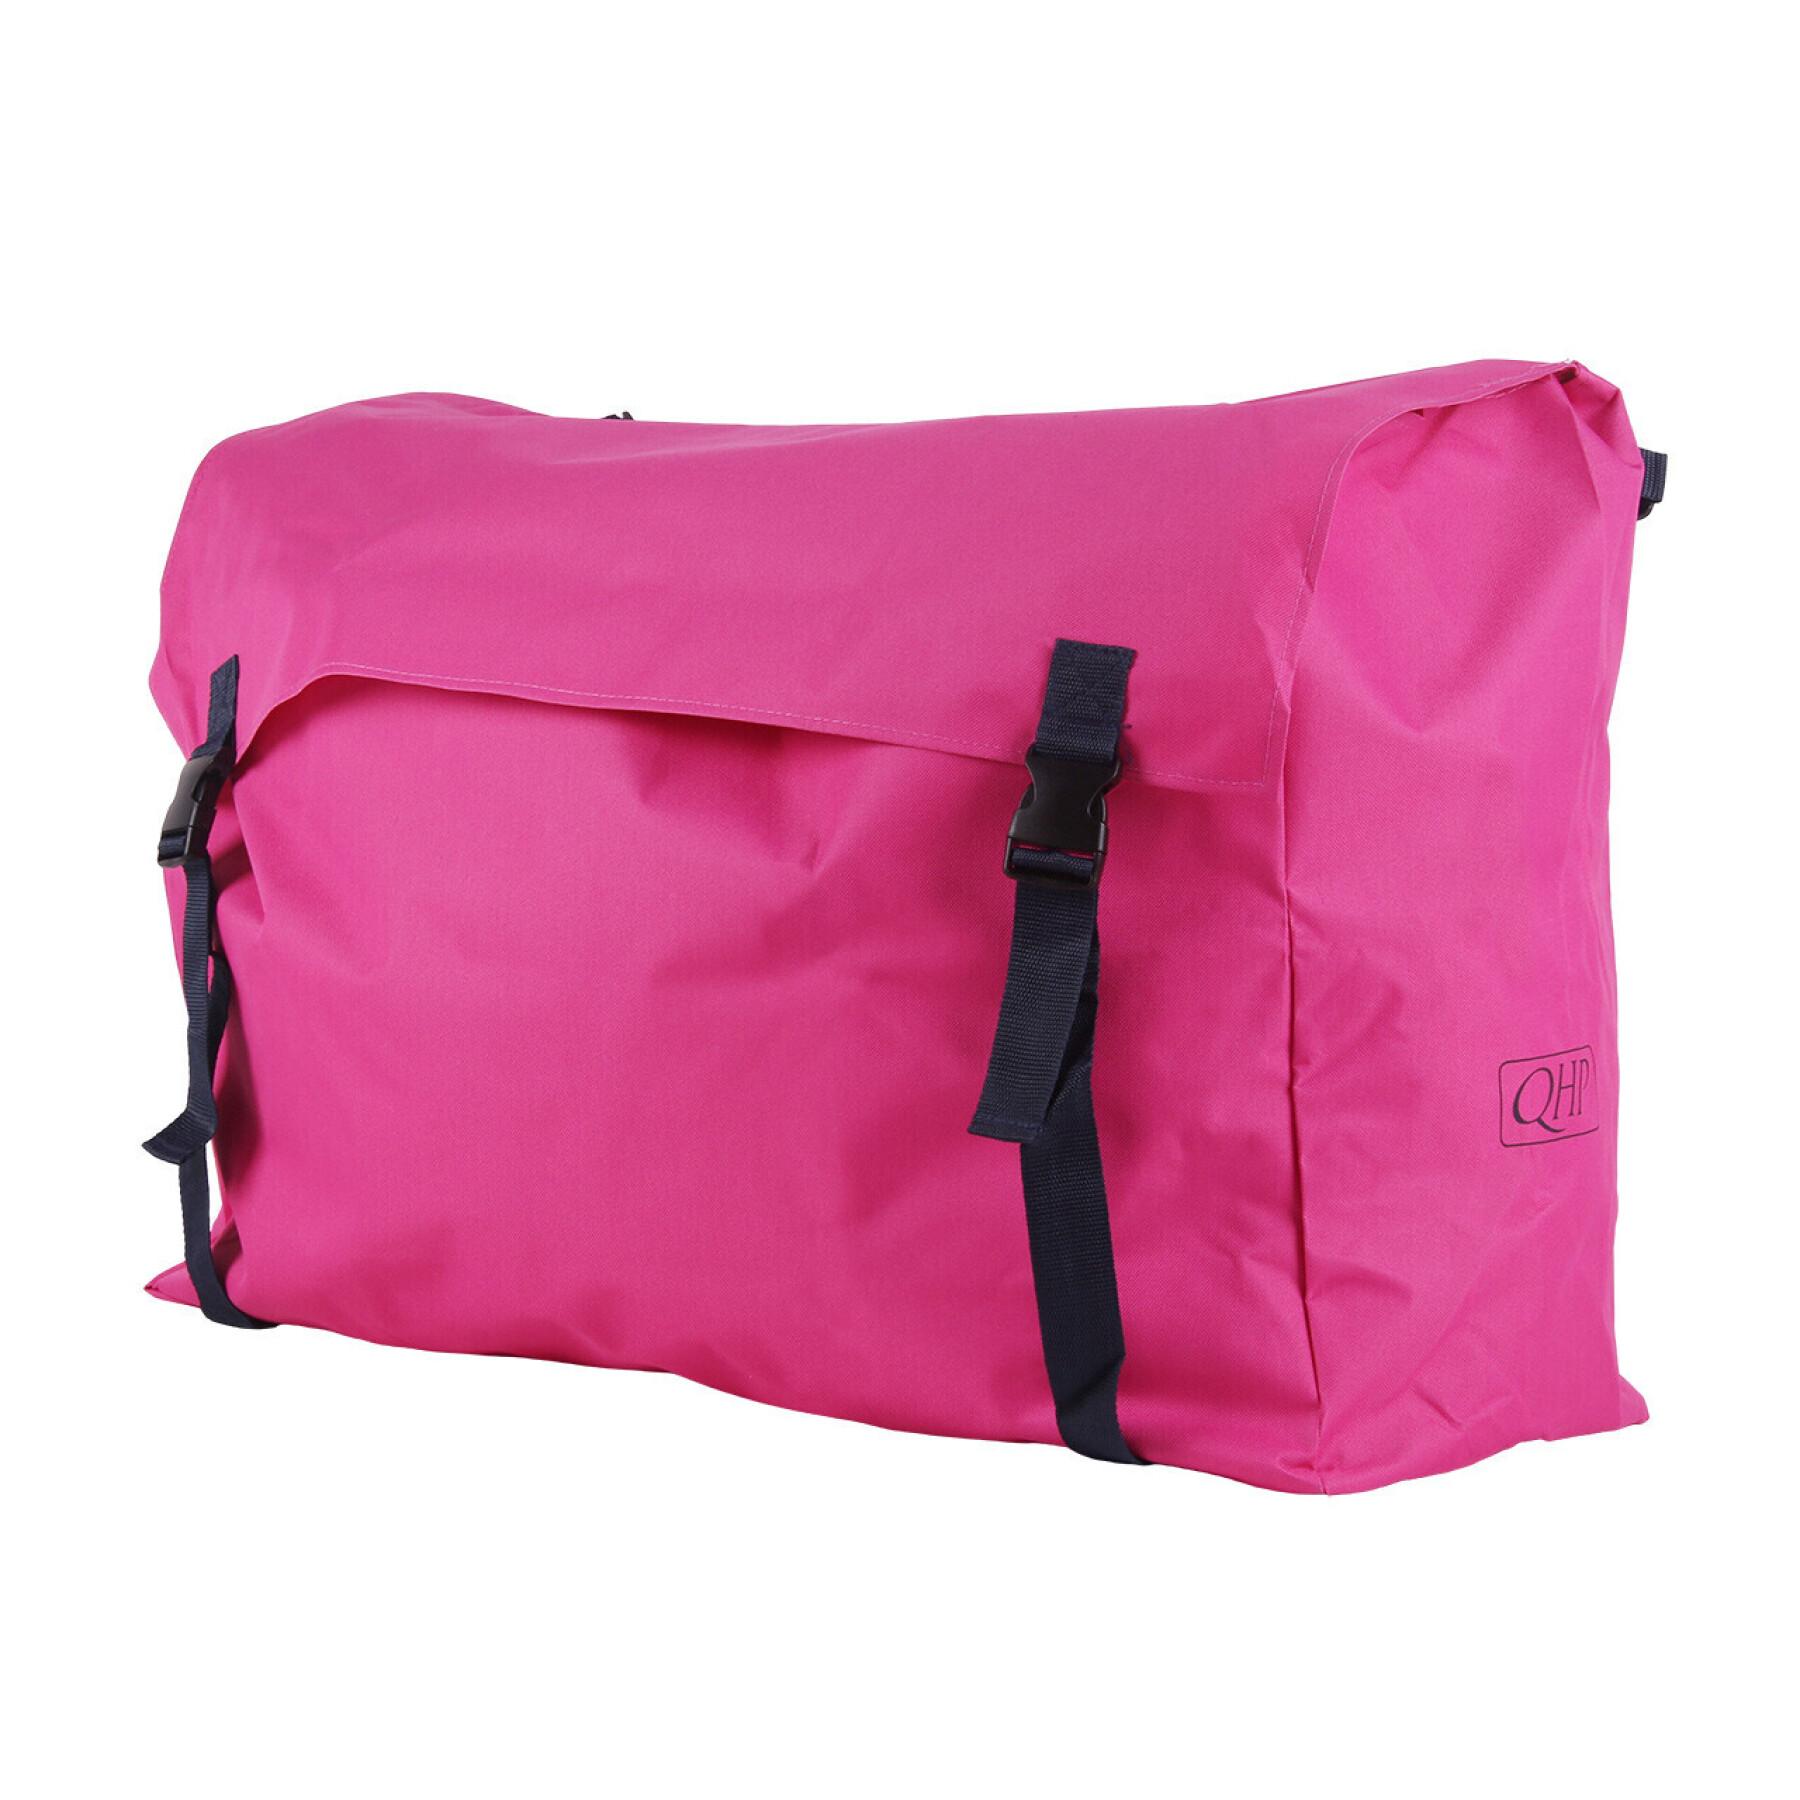 Stable bag QHP